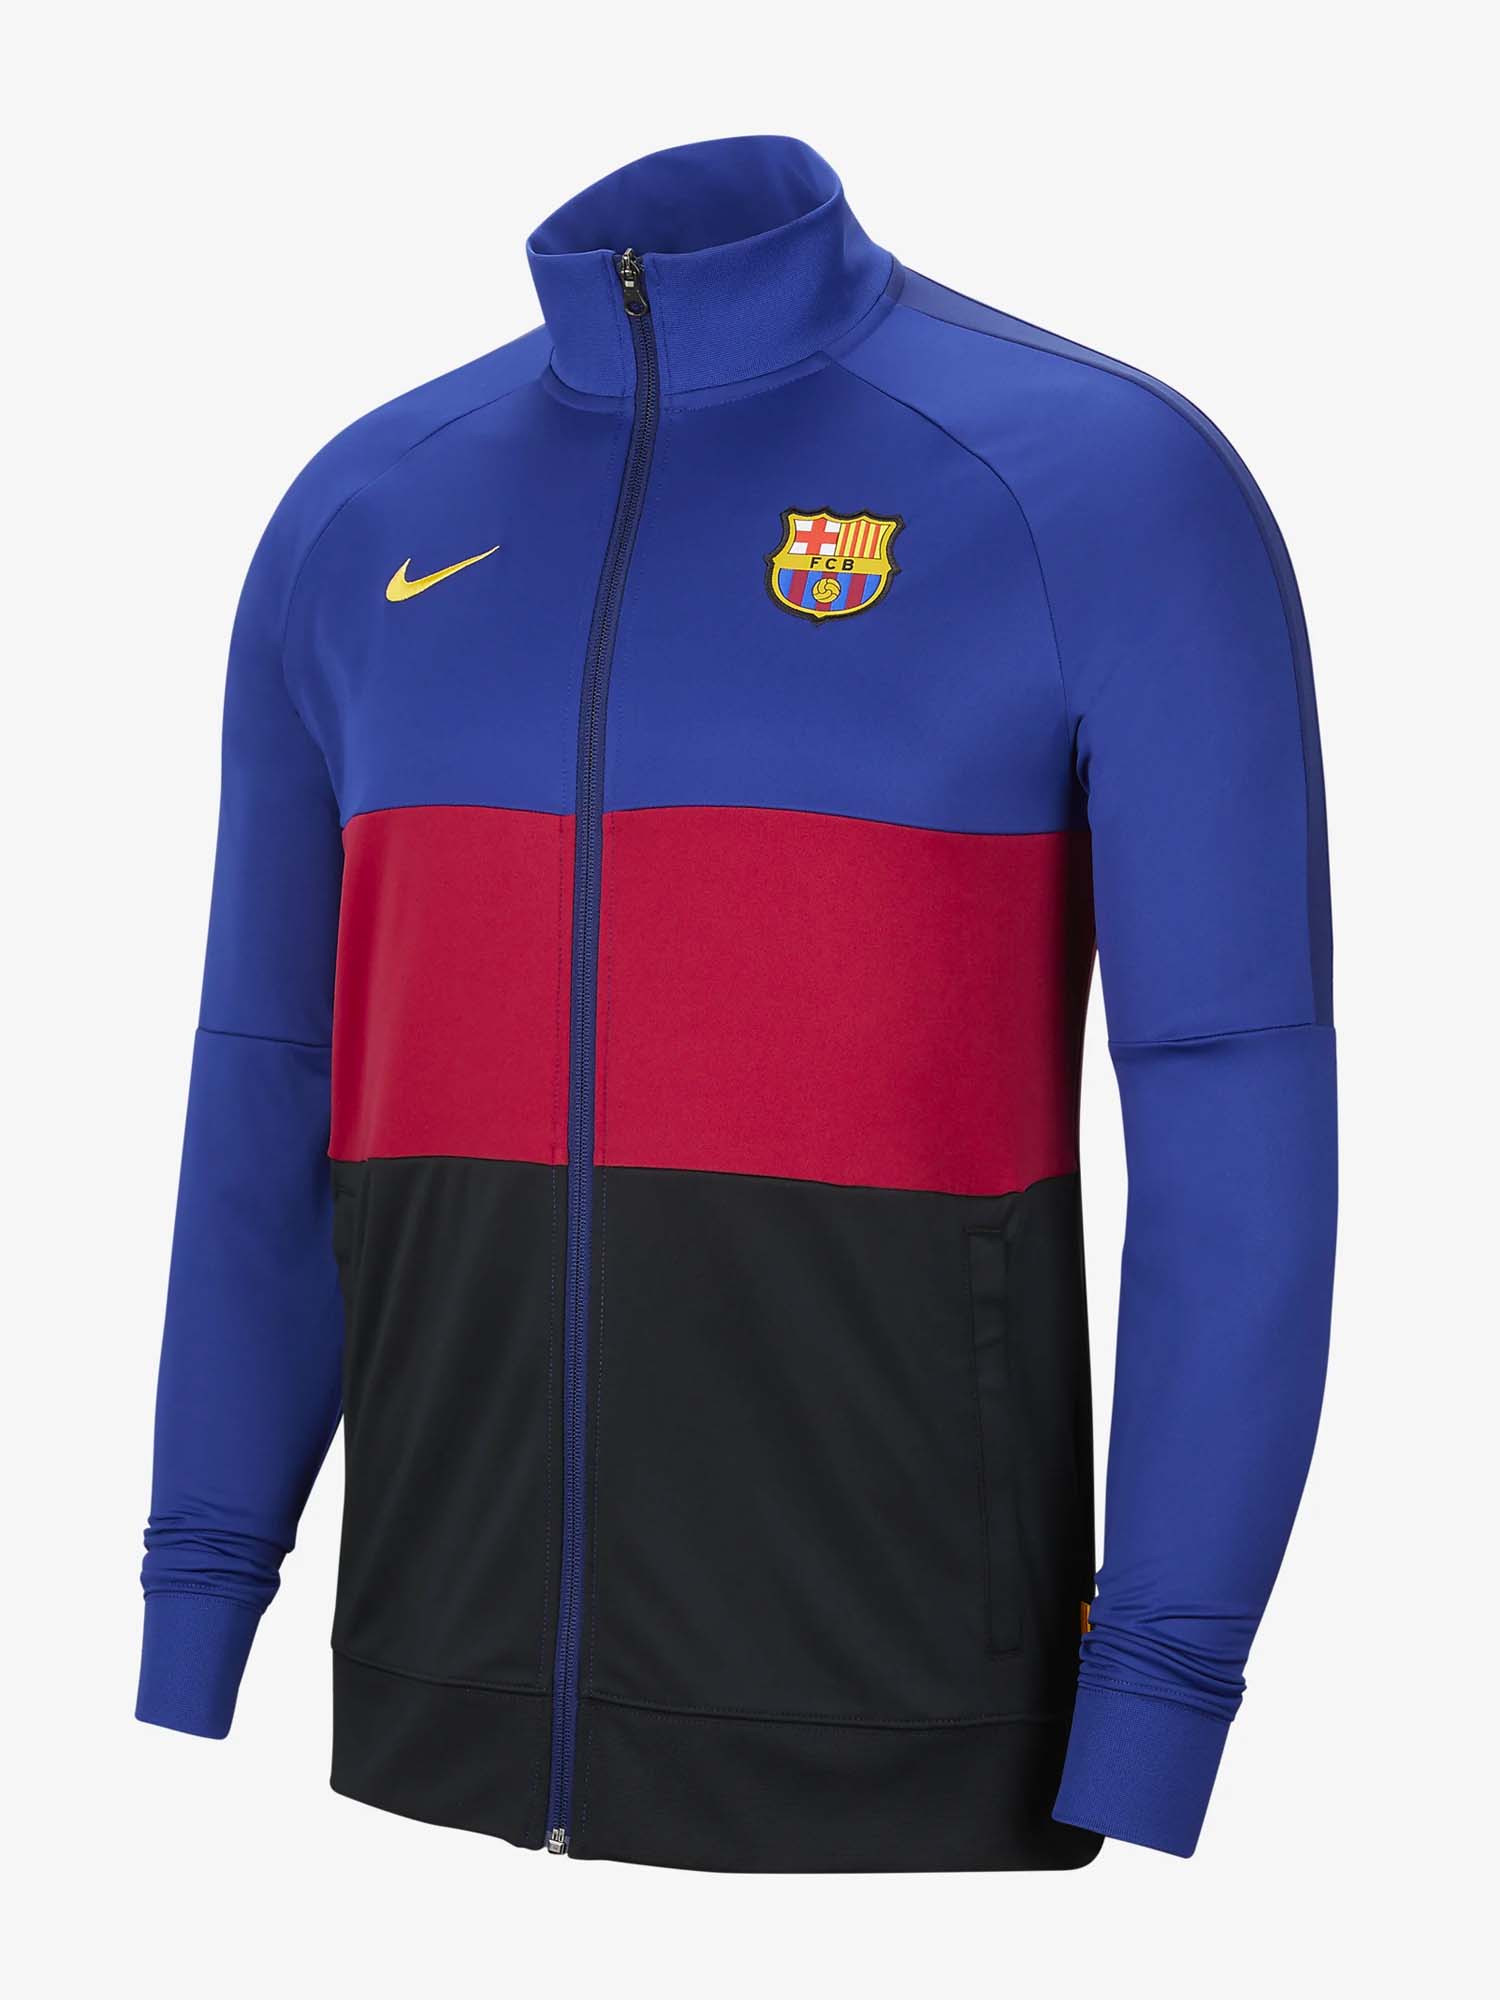 Fc Barcelona Training Collection portrait soccerbible 20 21_0013_Layer 19.jpg